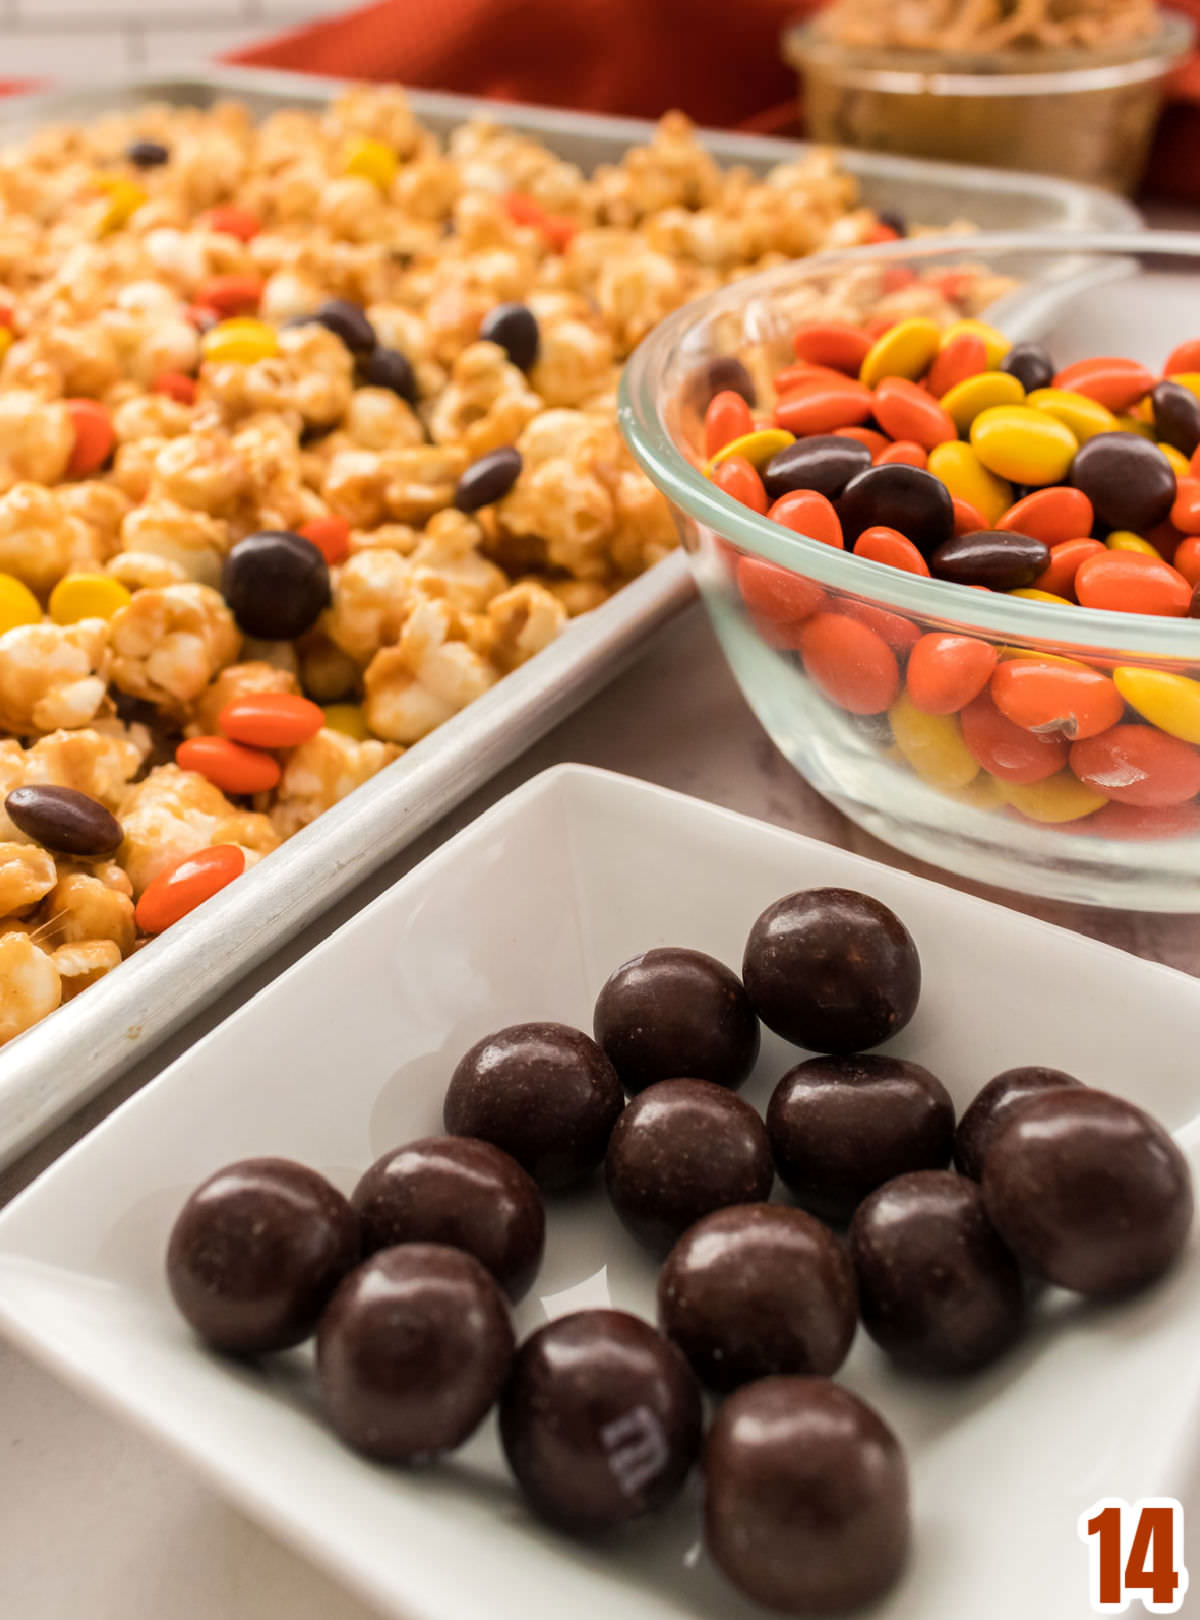 Peanut Butter Popcorn laying flat in a cookie sheet sitting next to a ramekin filled with Brown Pretzel M&M's and a glass bowl filled with Reese's Pieces candy.